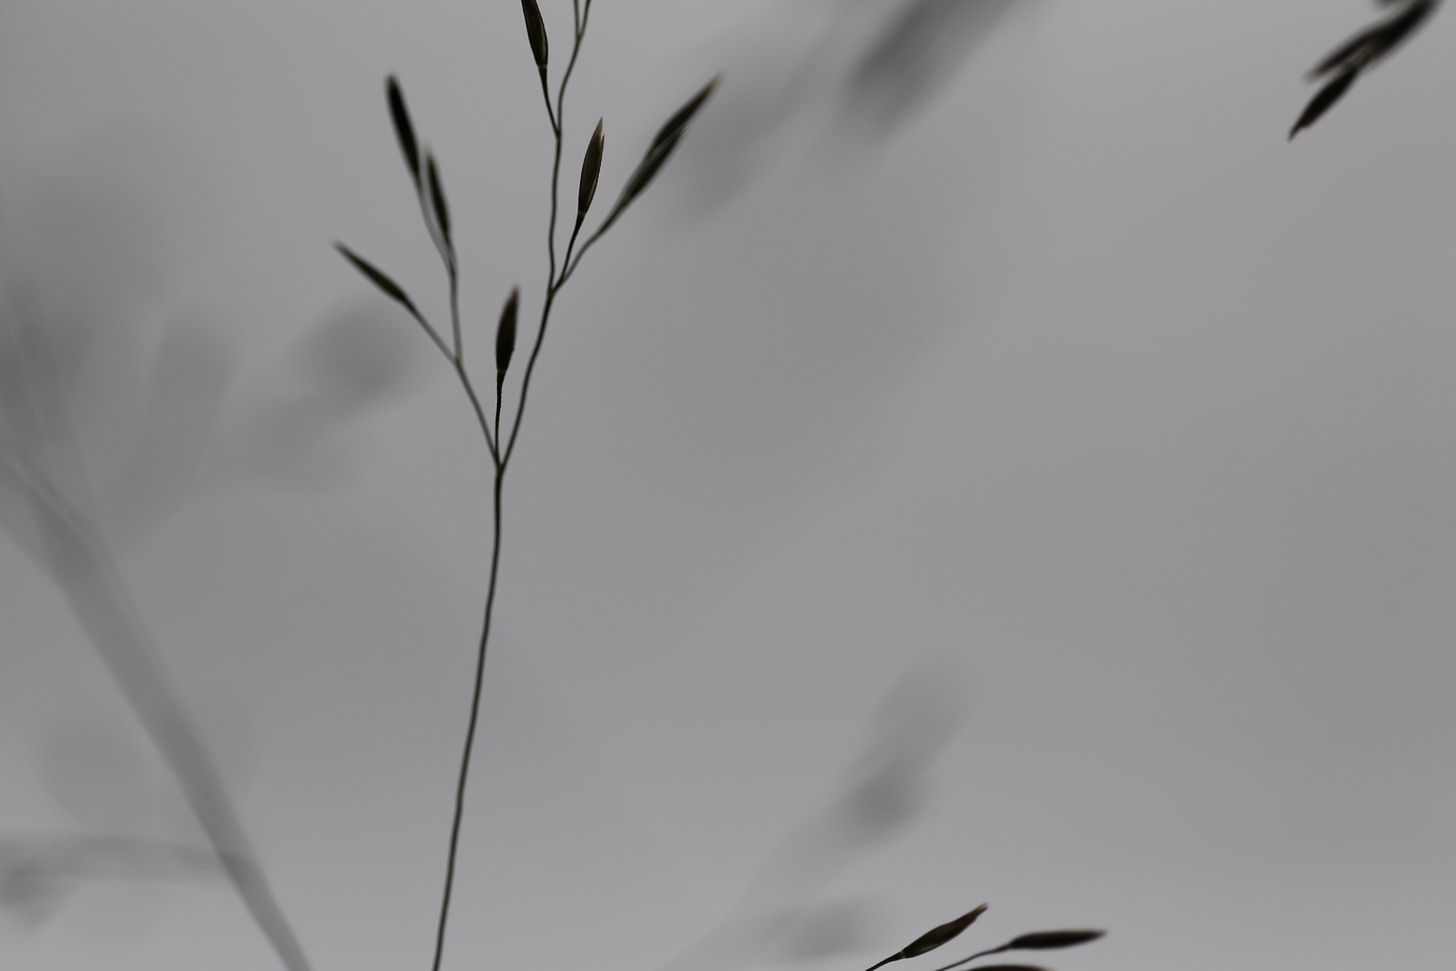 Abstract monochromatic close up of Deschampsia cespitosa panicle (tufted hair grass)